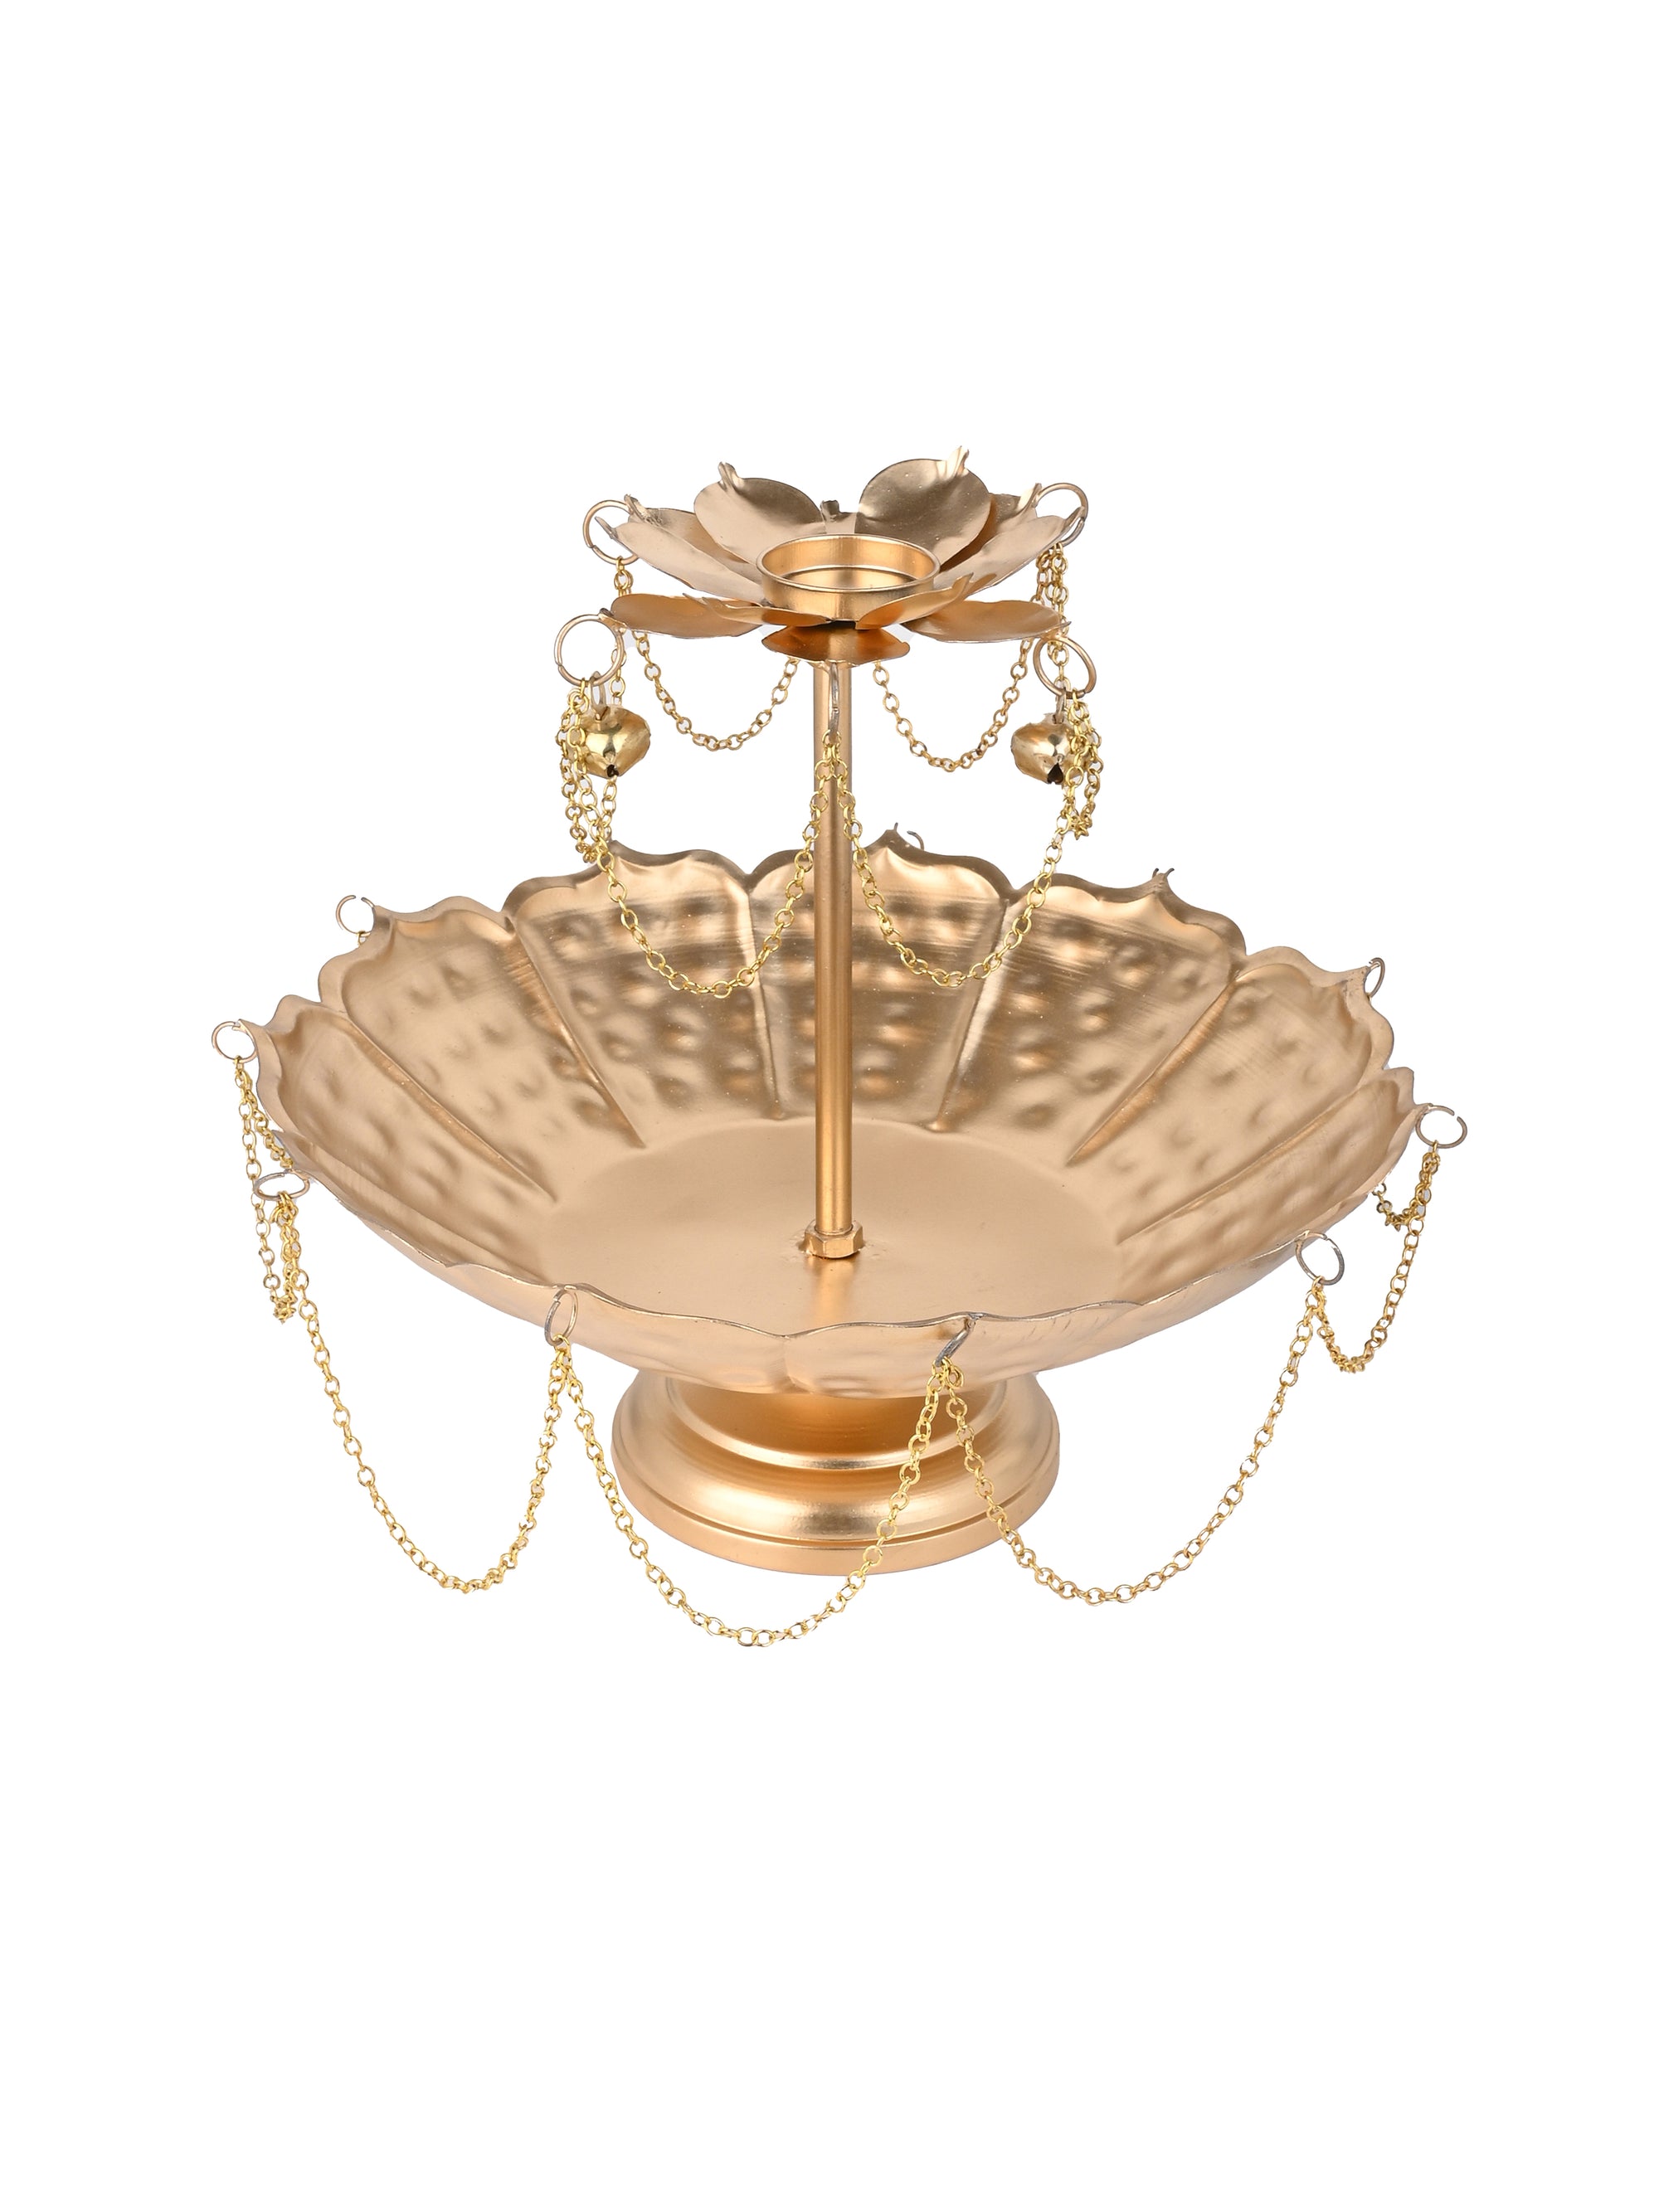 2 Tier Chain Design Urli with Candle Stand for Puja Rituals and Festive Occasions